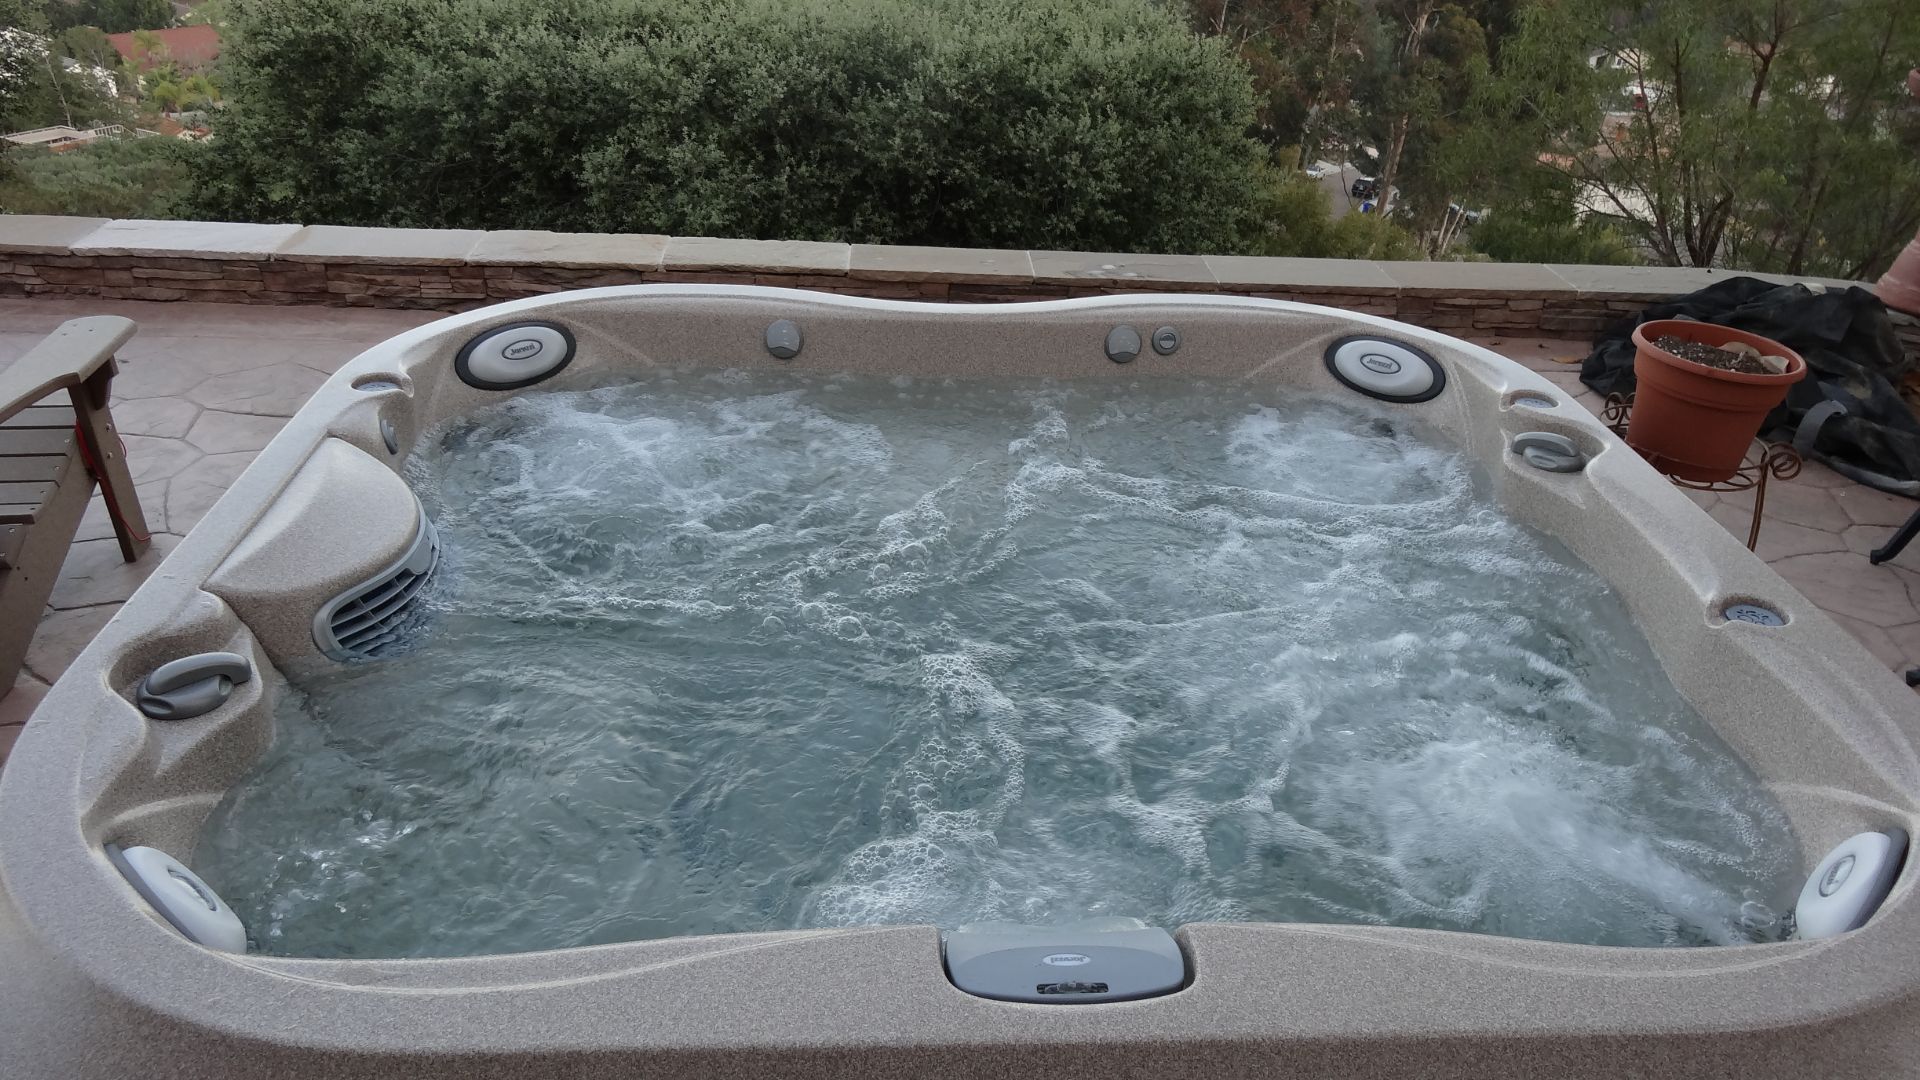 To keep your hot tub clean like this one, learn everything you need to know about hot tub alkalinity.